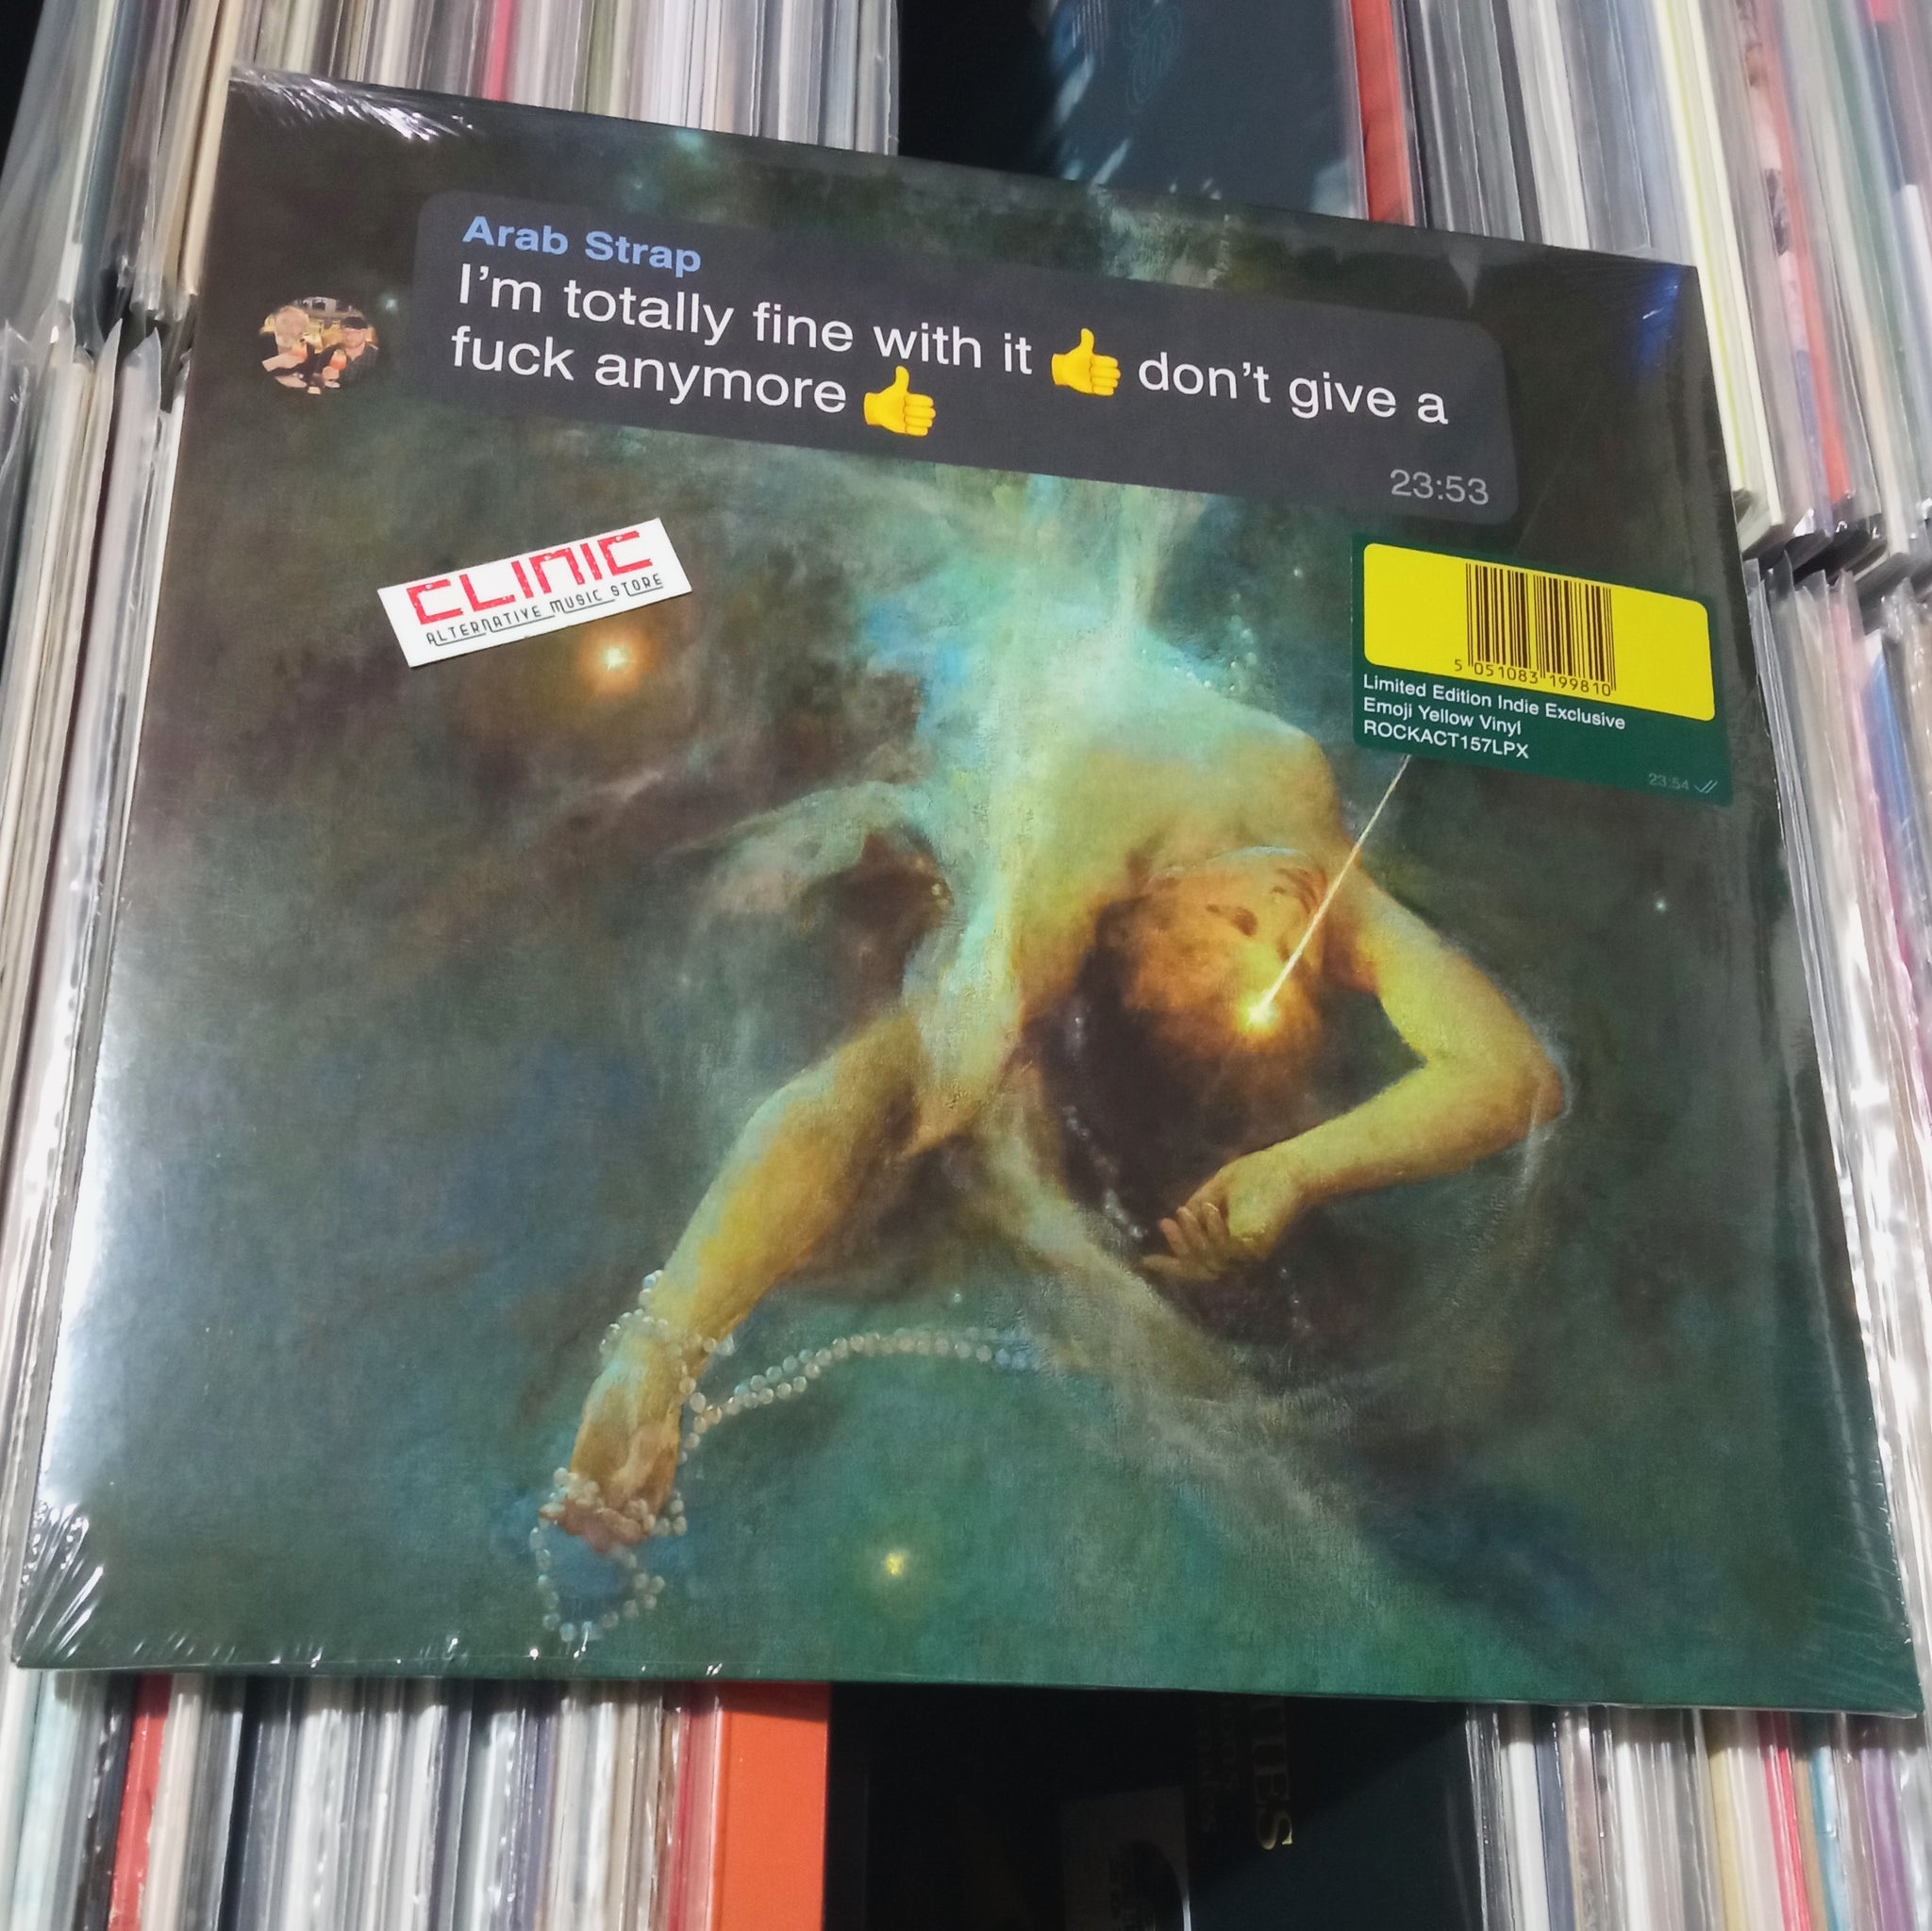 LP - ARAB STRAP - I'M TOTALLY FINE WITH IT. DON'T GIVE A FUCK ANYMORE (Indie Exclusive)